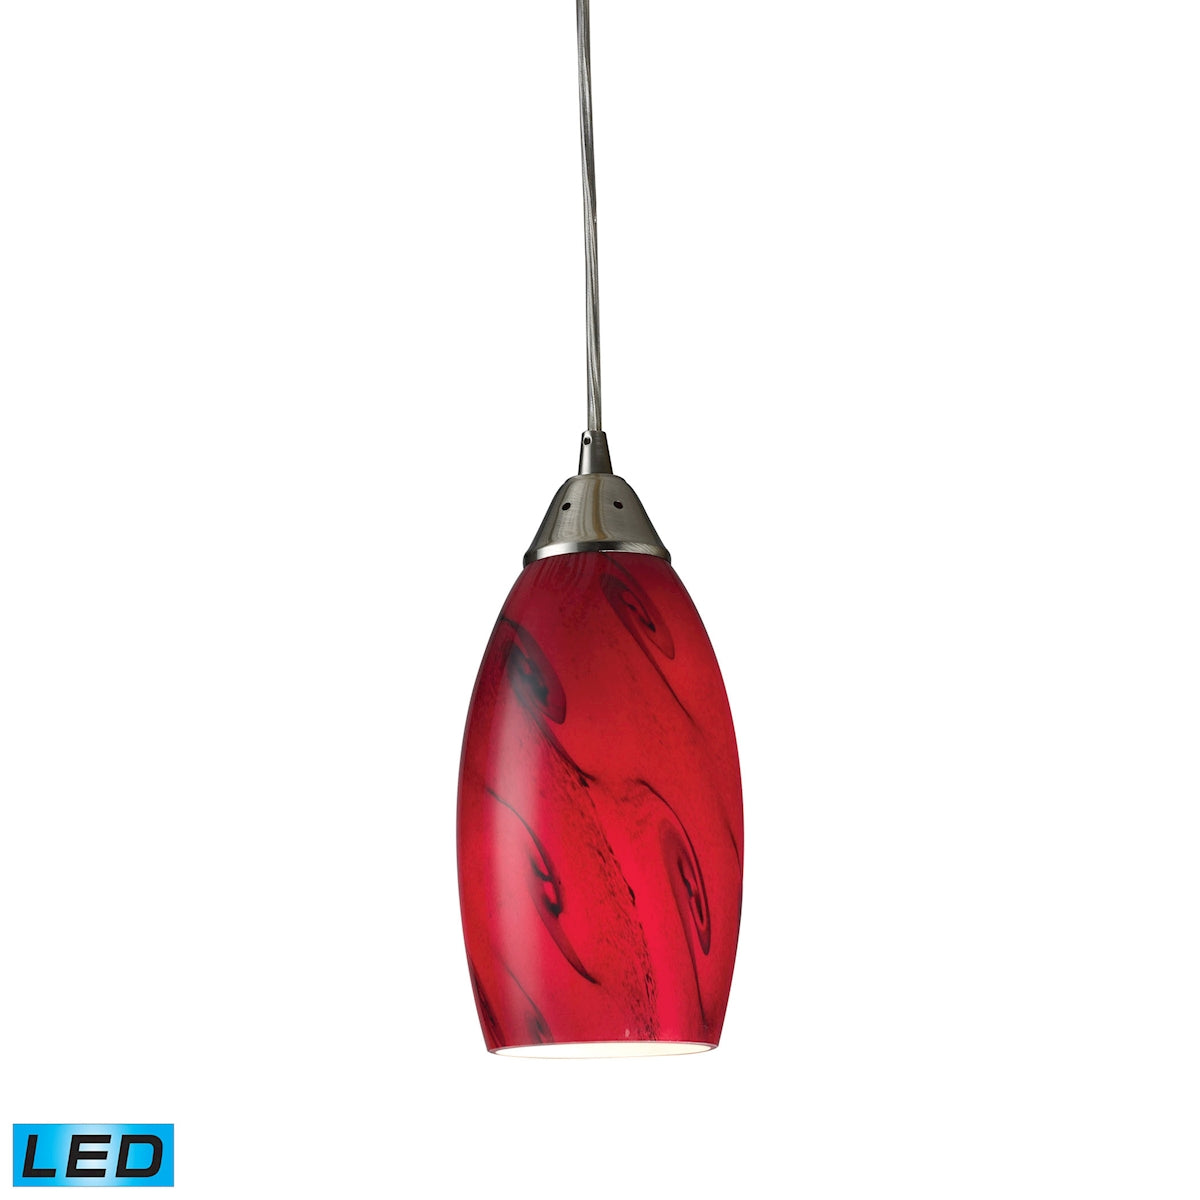 ELK Lighting 20001/1RG-LED Galaxy 1-Light Mini Pendant in Satin Nickel with Red Glass - Includes LED Bulb